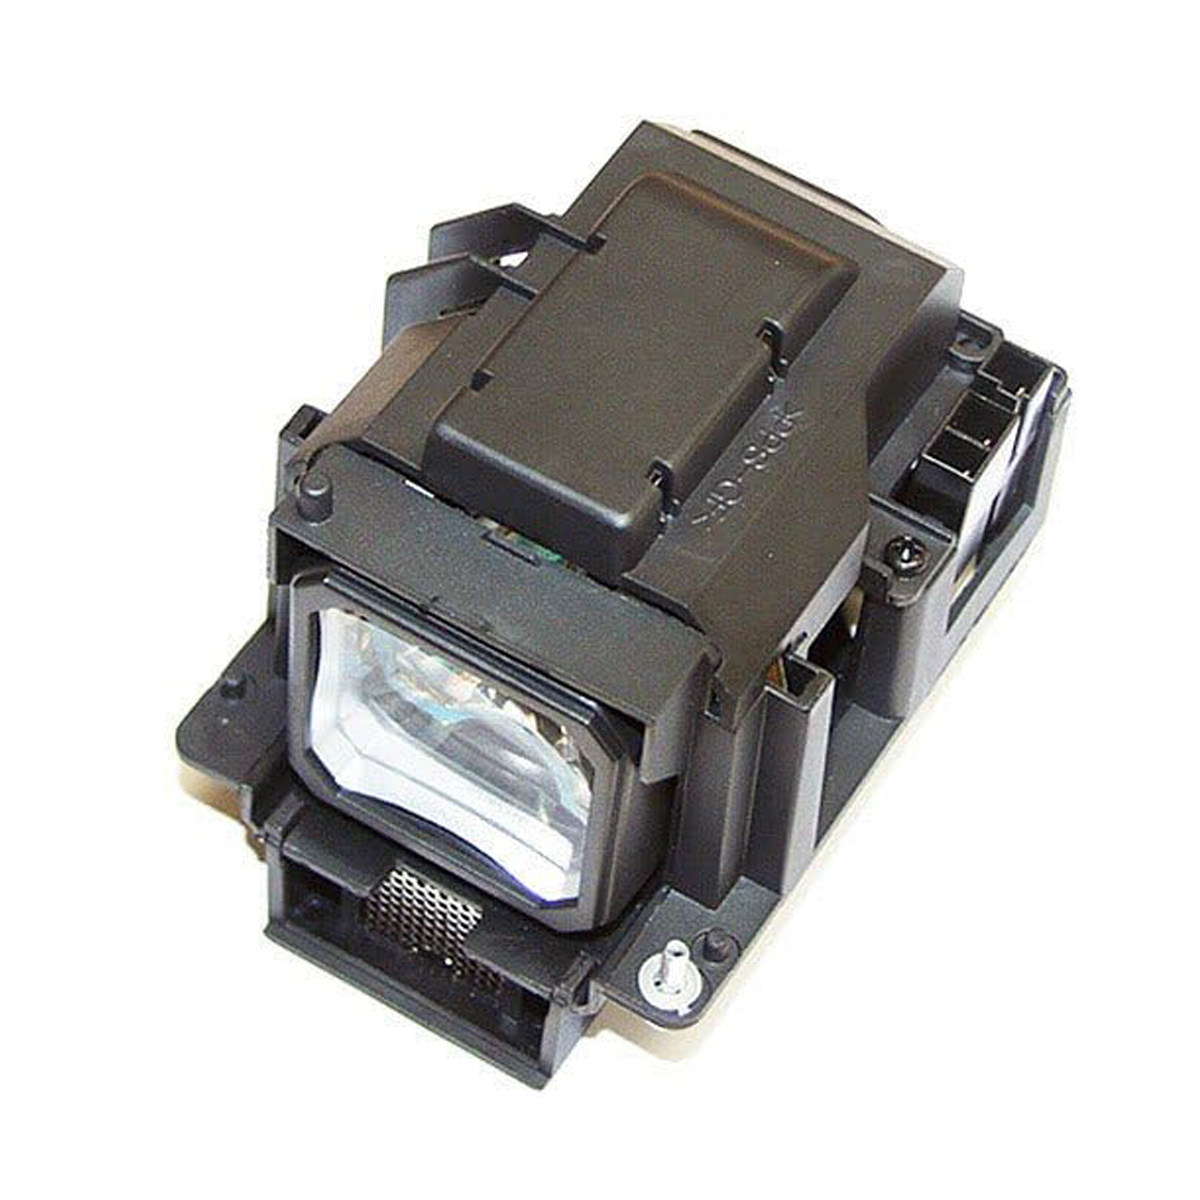 Replacement Projector lamp LV-LP25/0943B001AA For CANON LV-X5